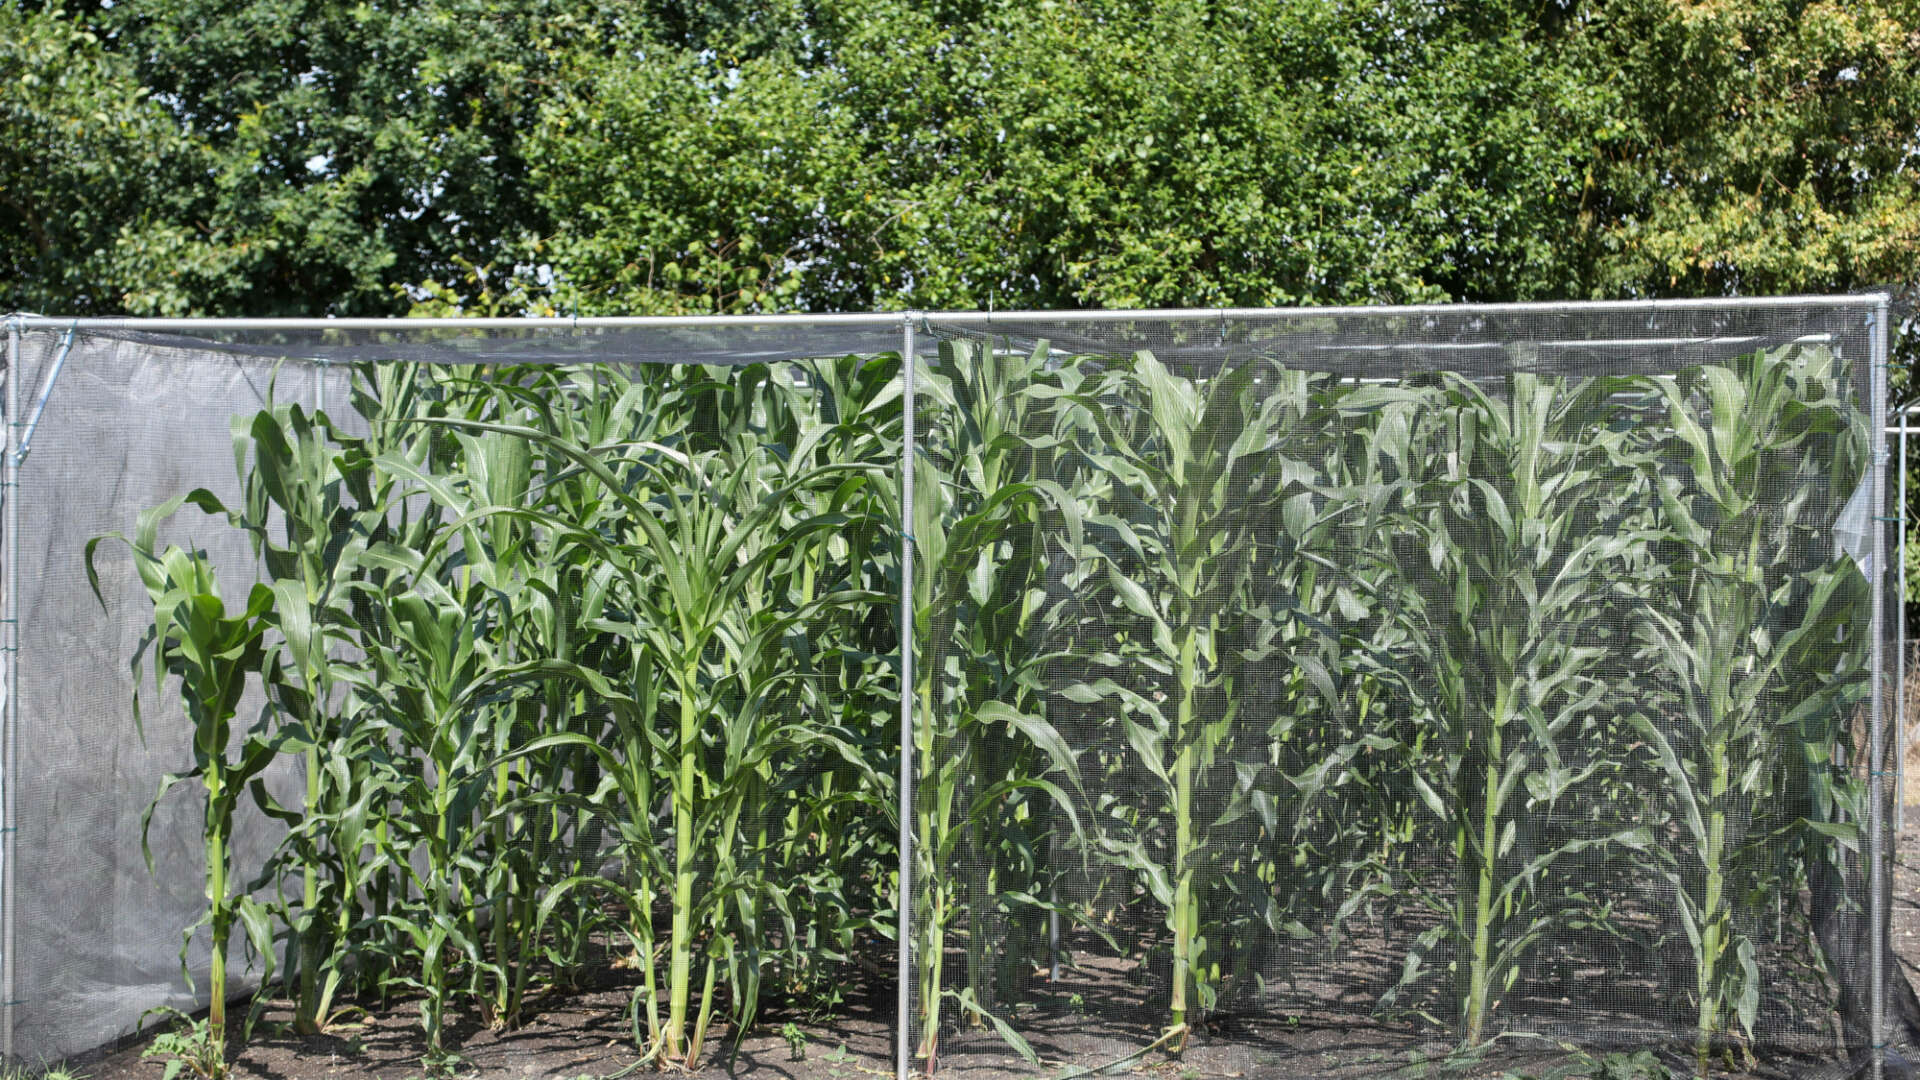 Barriers around crops to prevent cross pollination